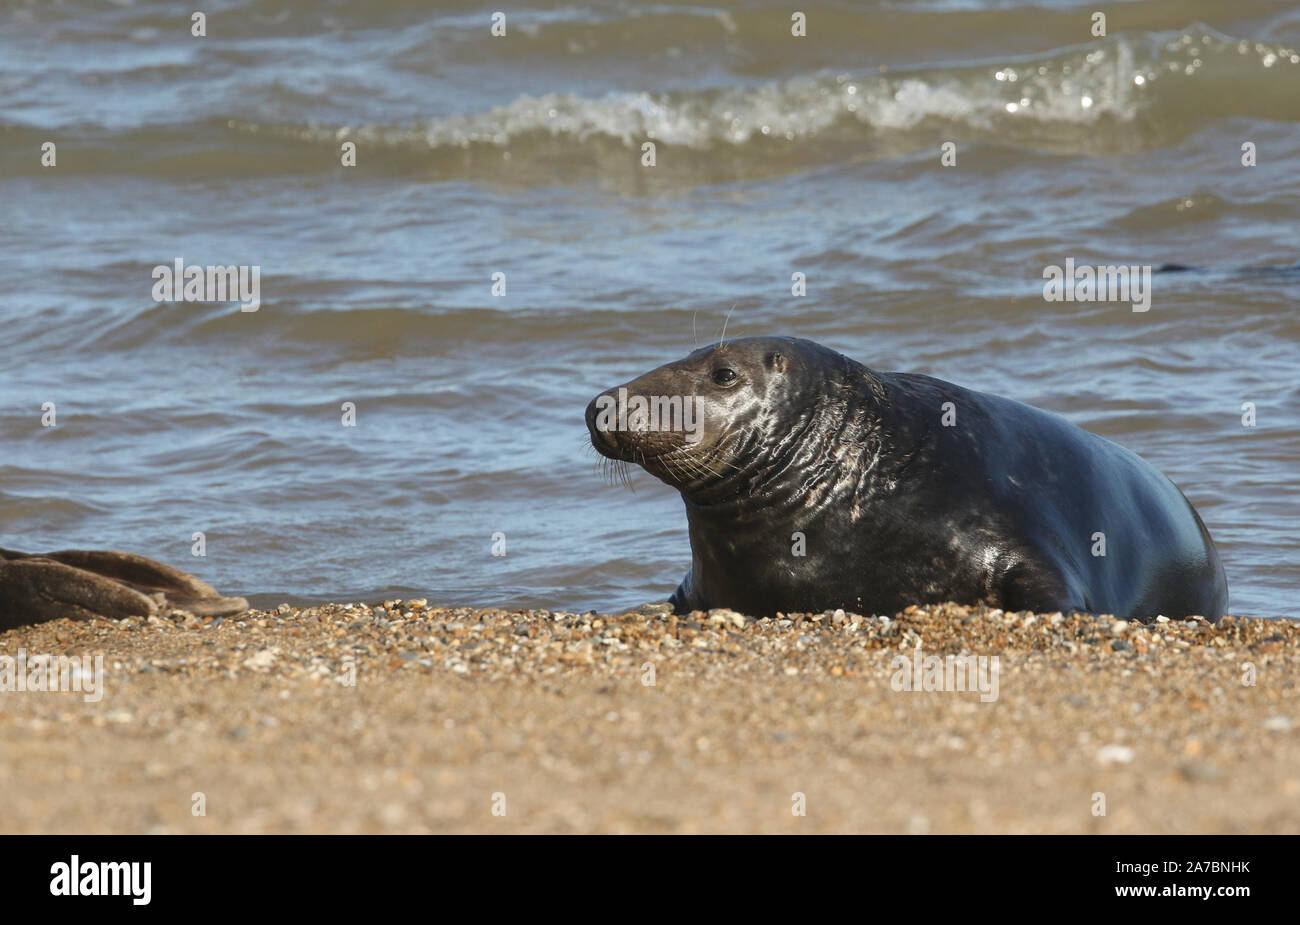 A Grey Seal, Halichoerus grypus, coming out of the sea, during breeding season. Stock Photo